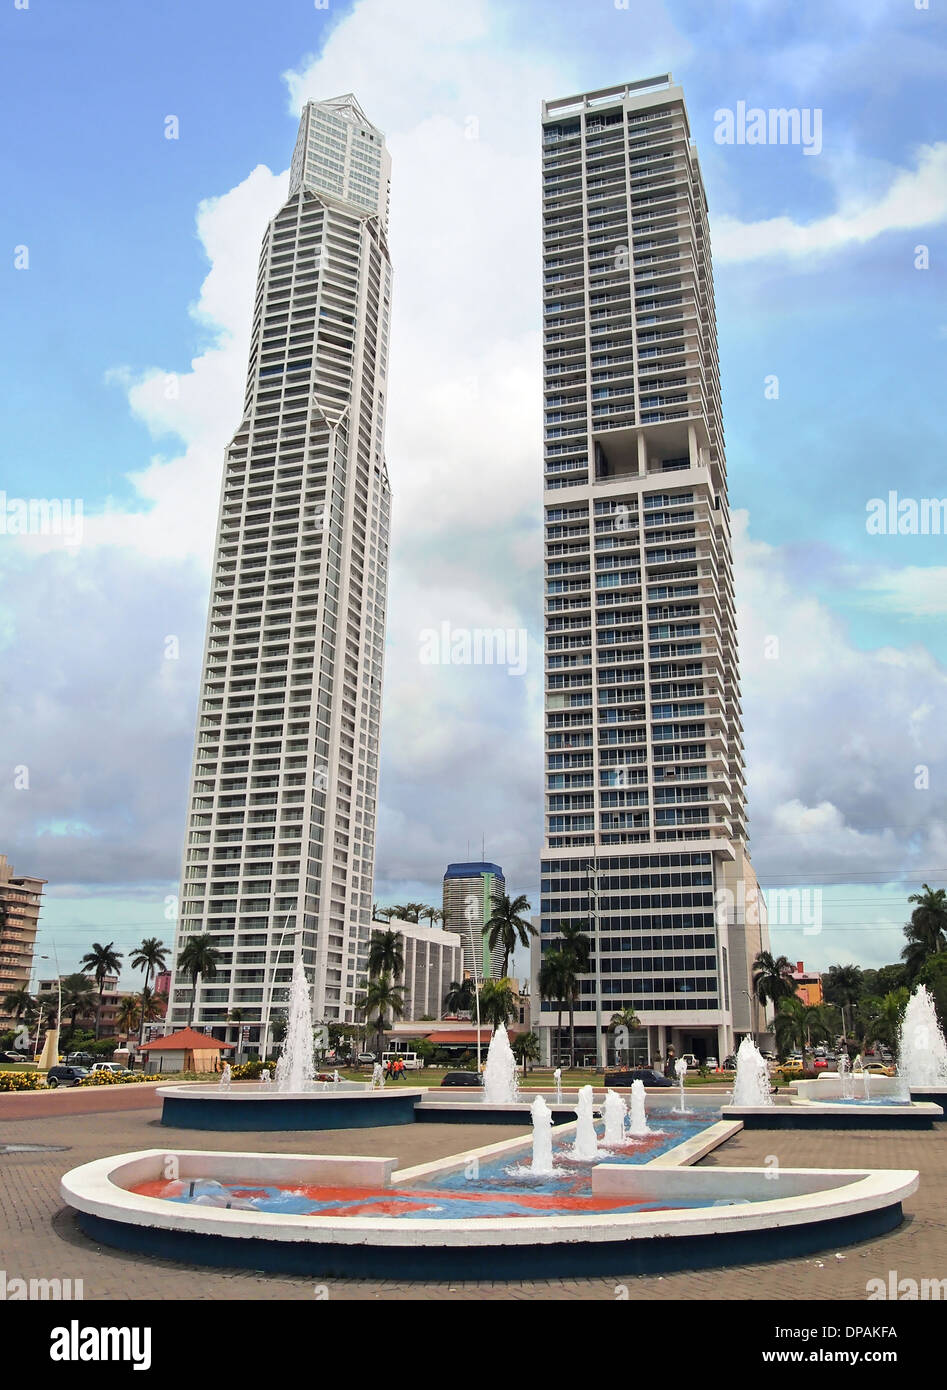 Two skyscrapers with fountain in foreground, Panama City , Panama, Central America Stock Photo